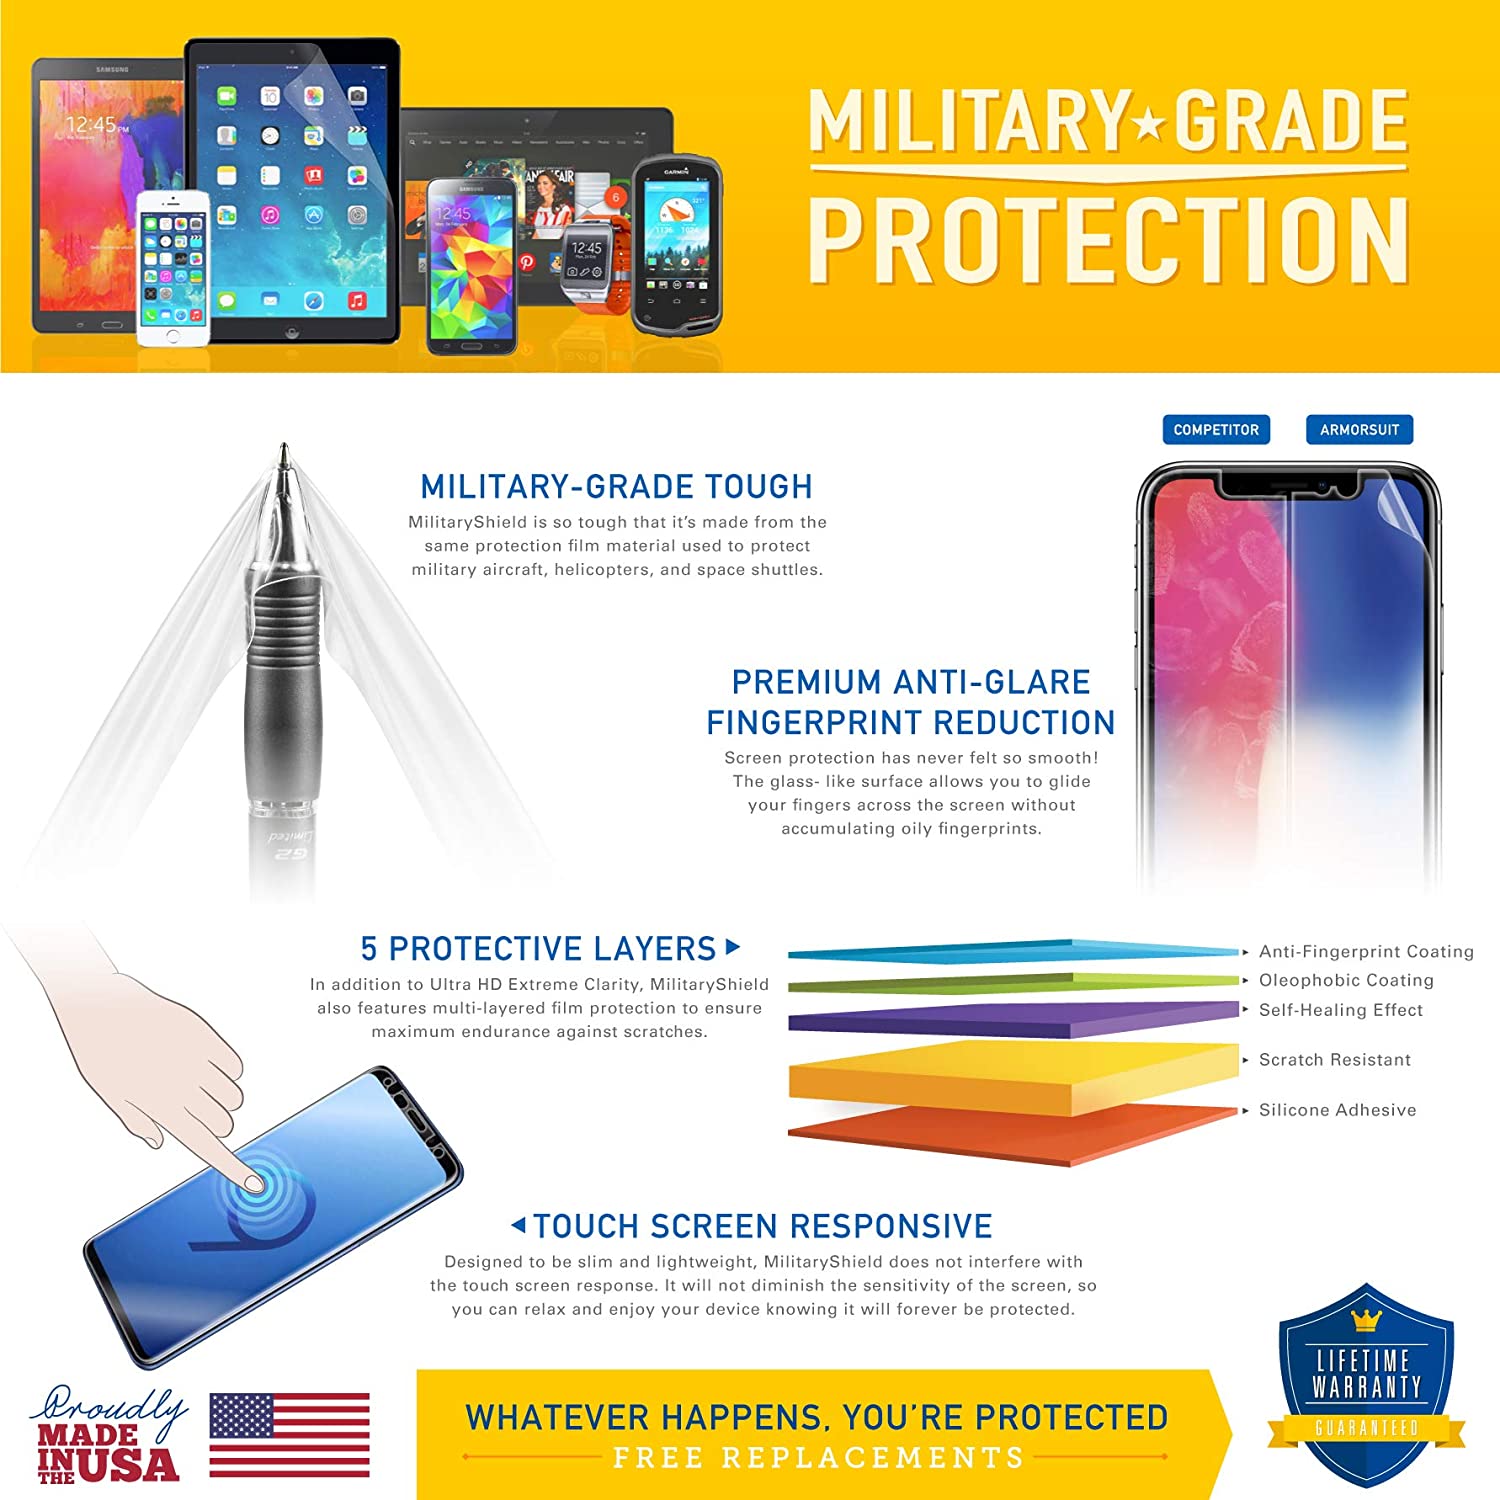 [2-Pack] Samsung Galaxy S6 Screen Protector [Full Coverage]